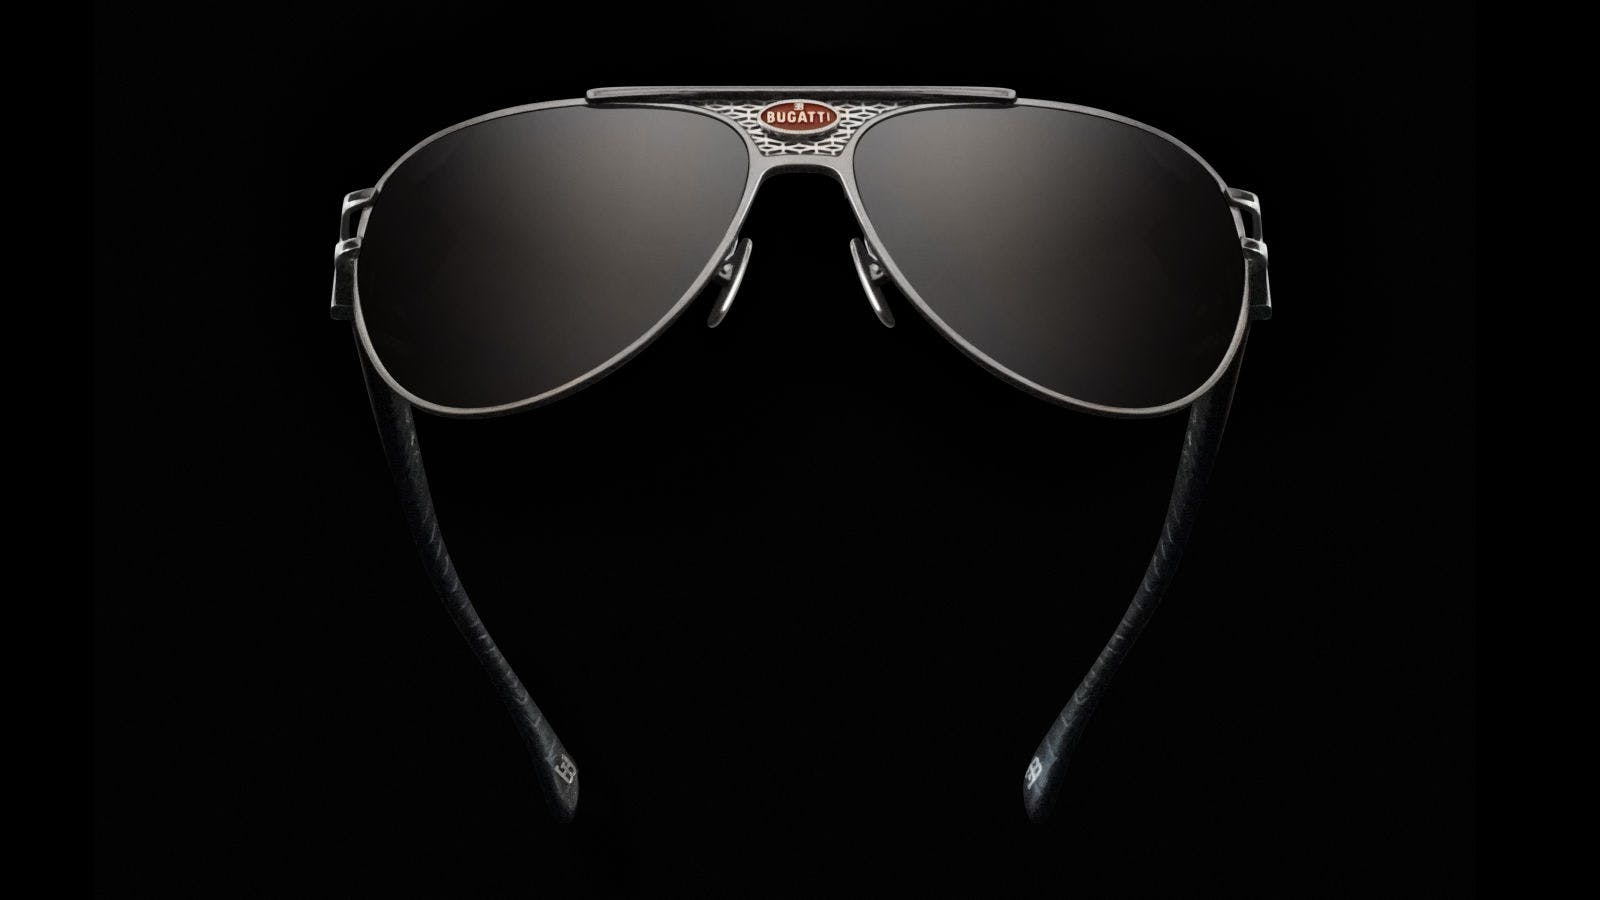 11. 925 Sterling Silver and Embossed Leather Temples, Bugatti Eyewear Collection One.